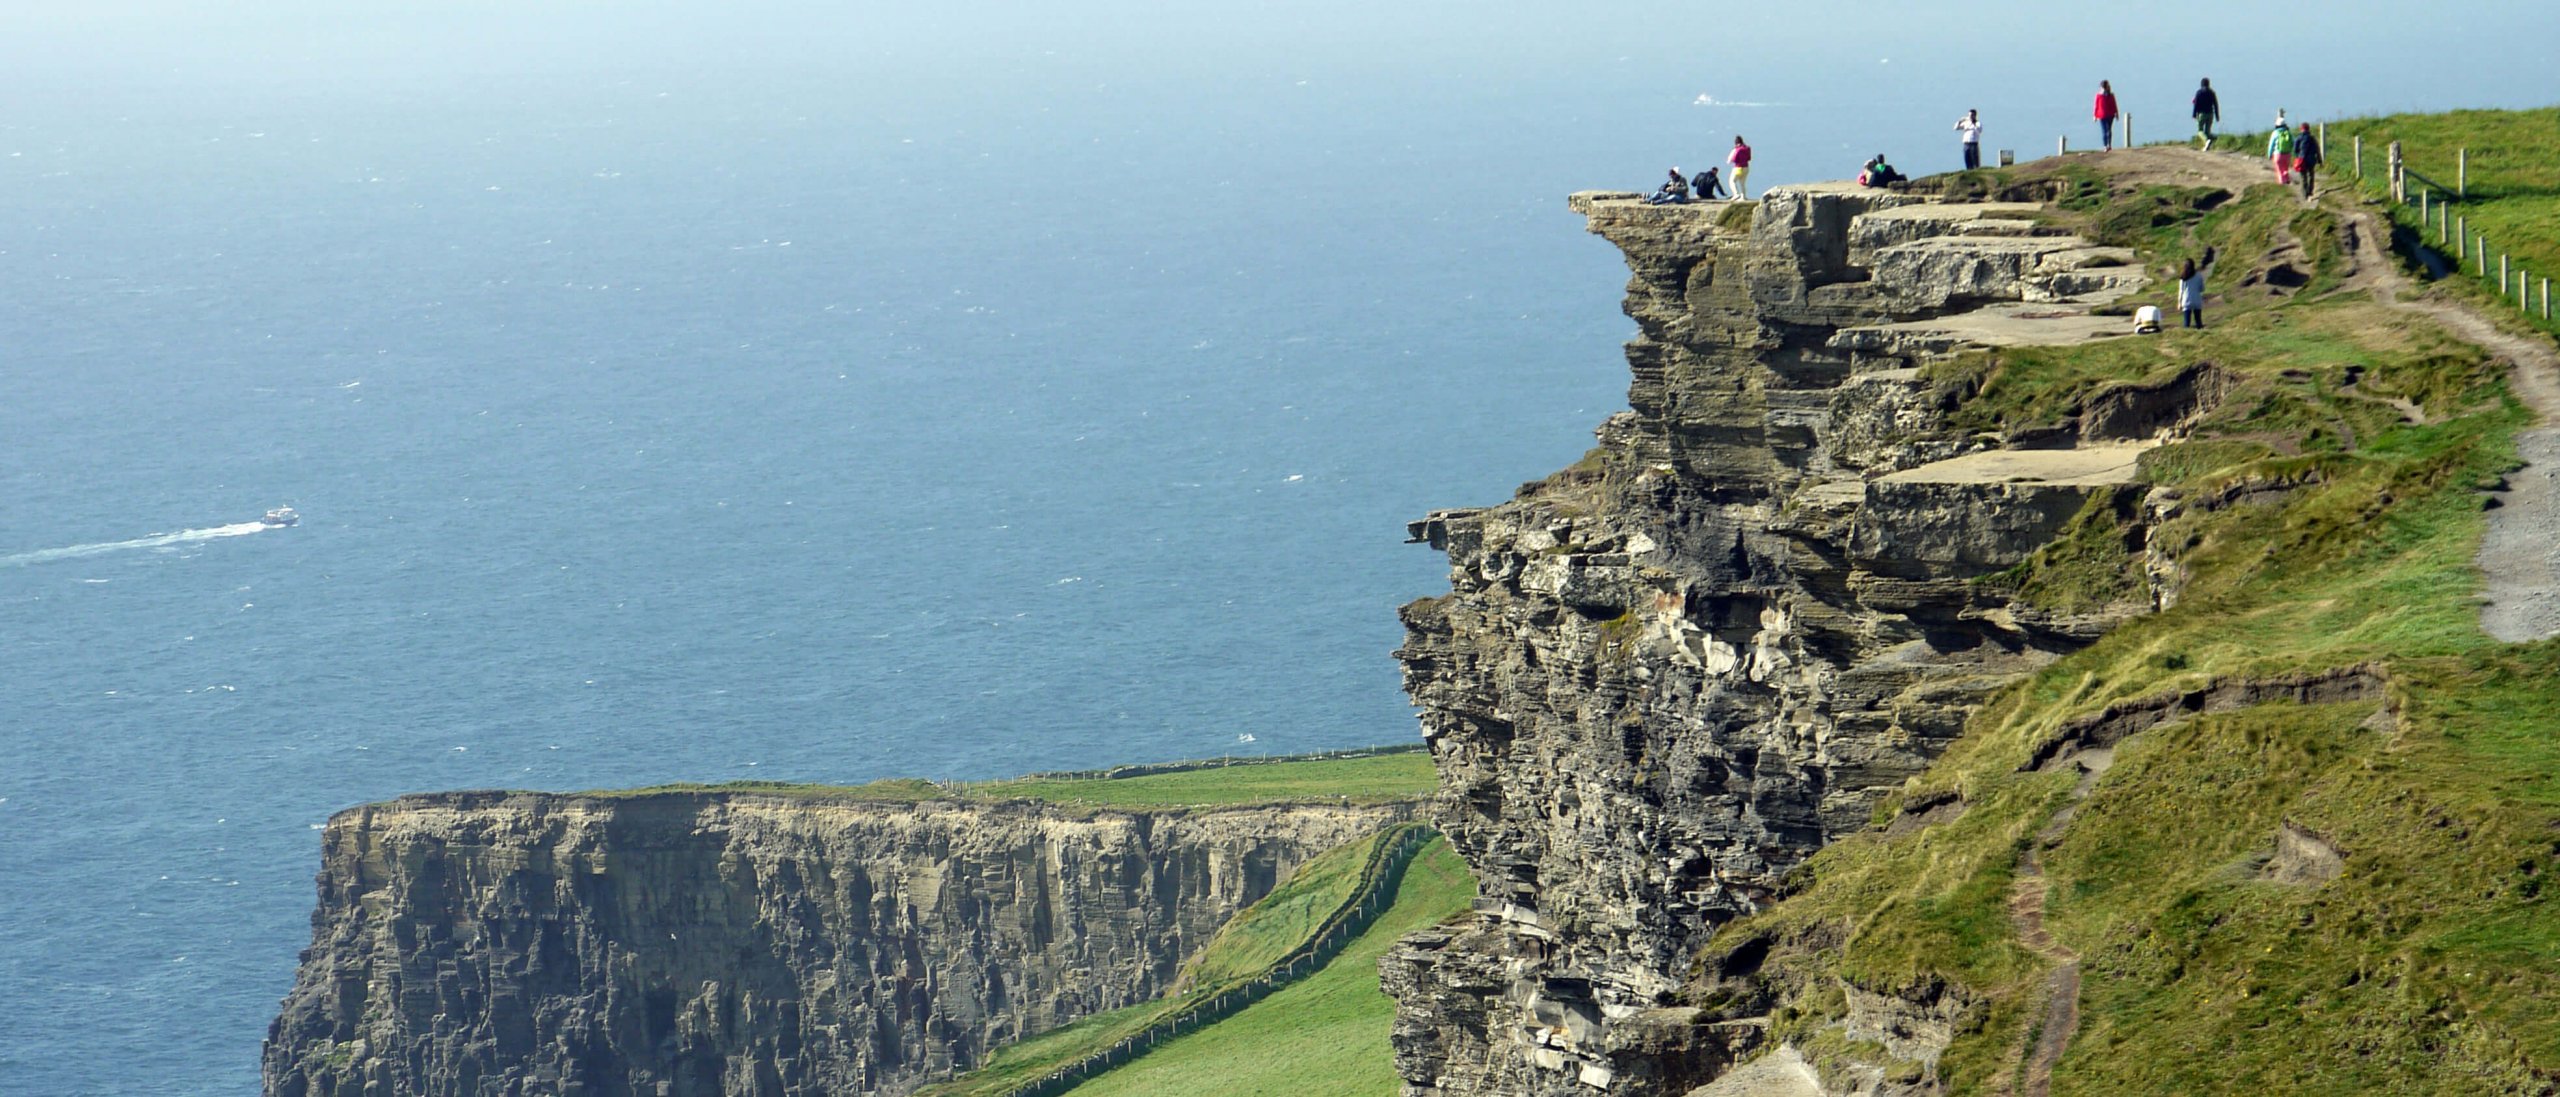 Hiking the Cliffs of Moher in Clare